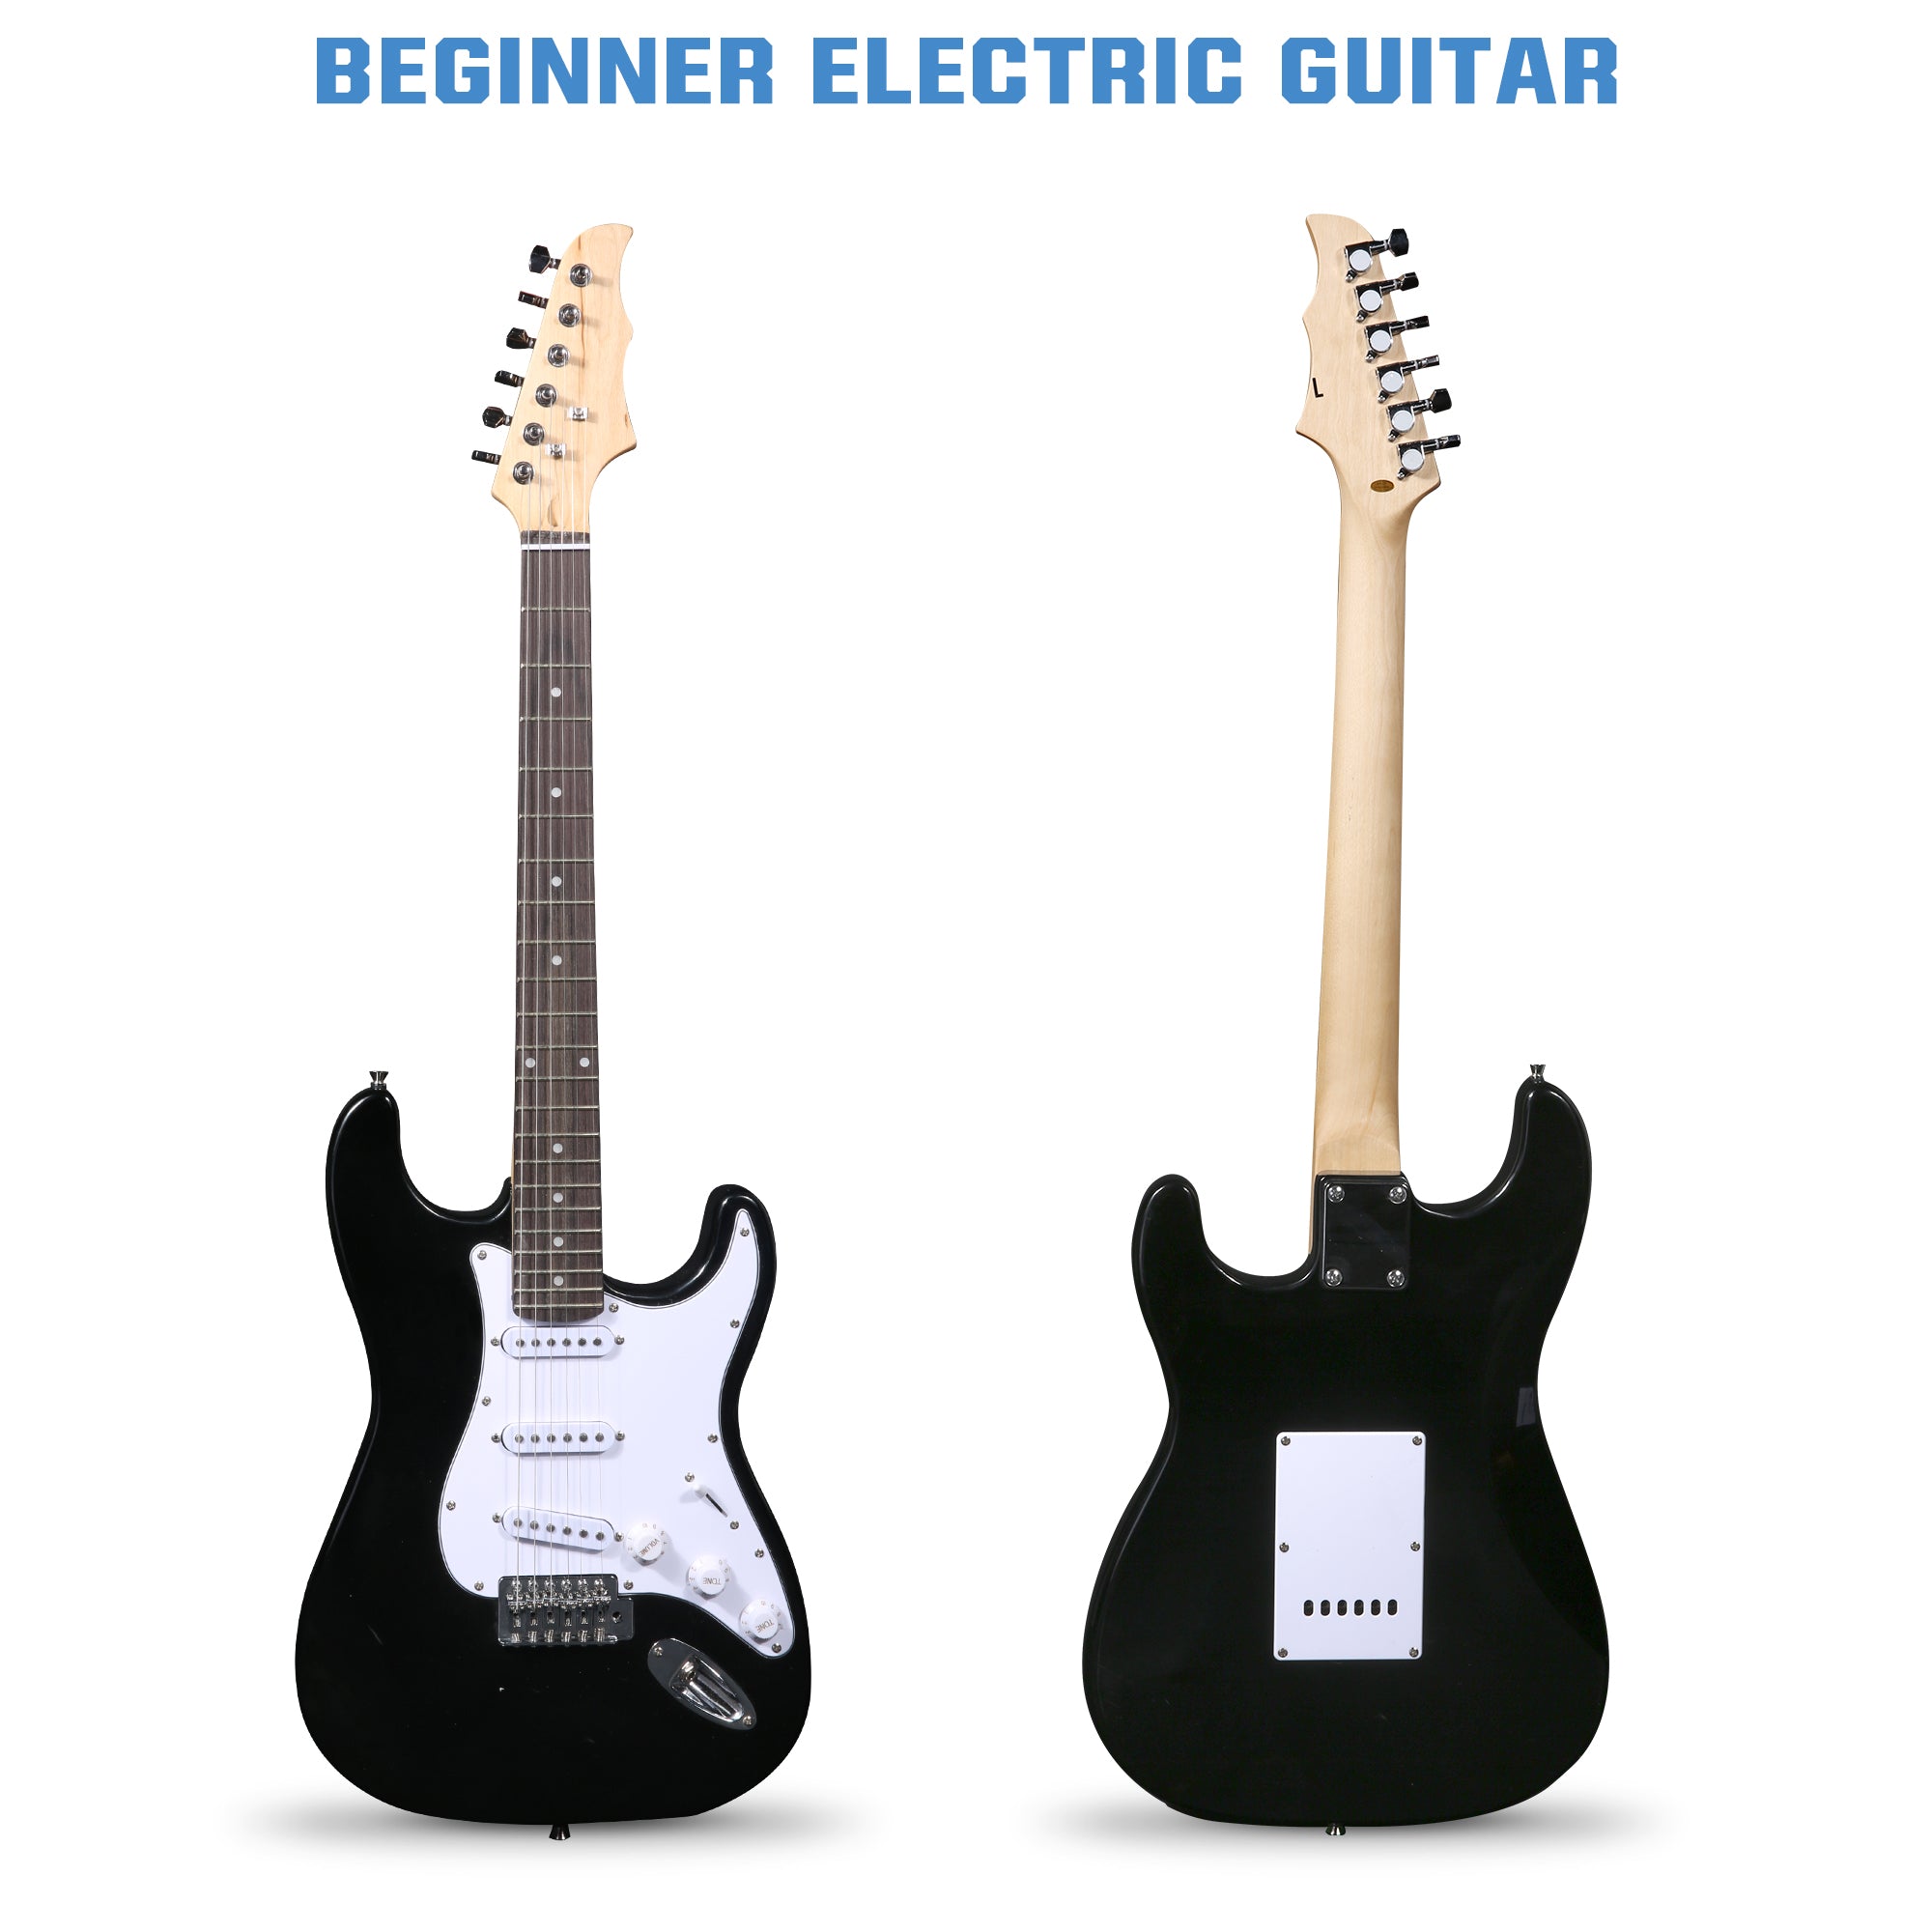 39.5" Full Size Electric Guitar for Beginners with Amplifier, Black and White